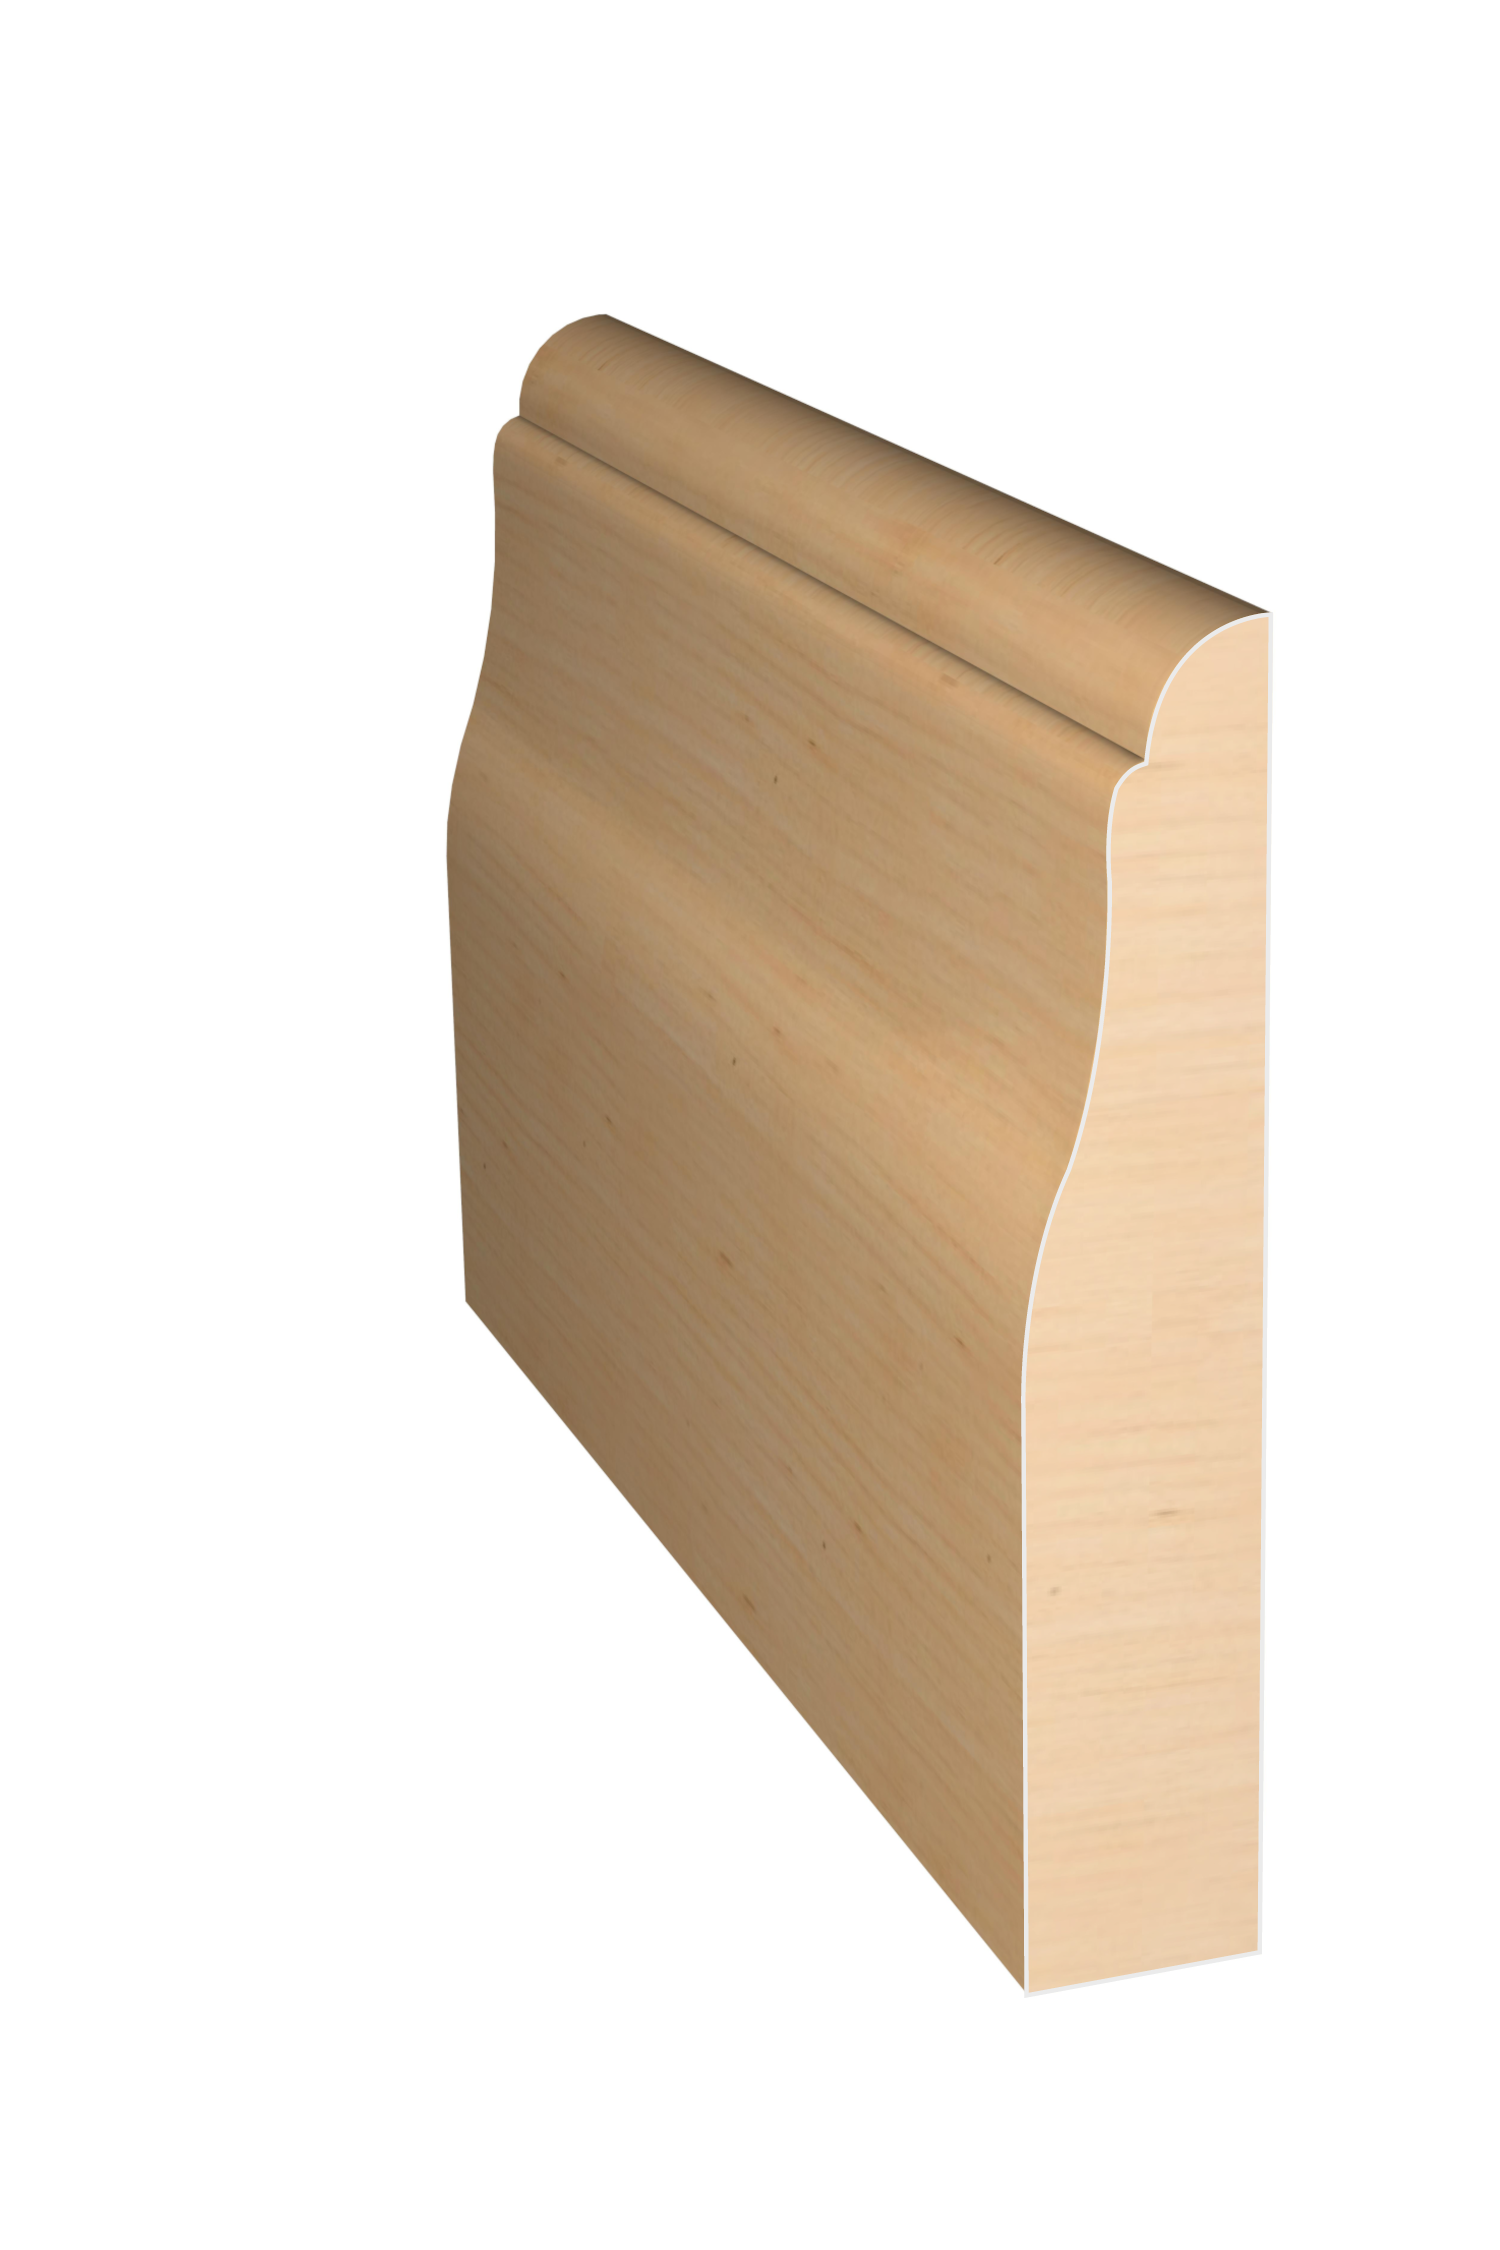 Three dimensional rendering of custom casing wood molding CAPL3347 made by Public Lumber Company in Detroit.